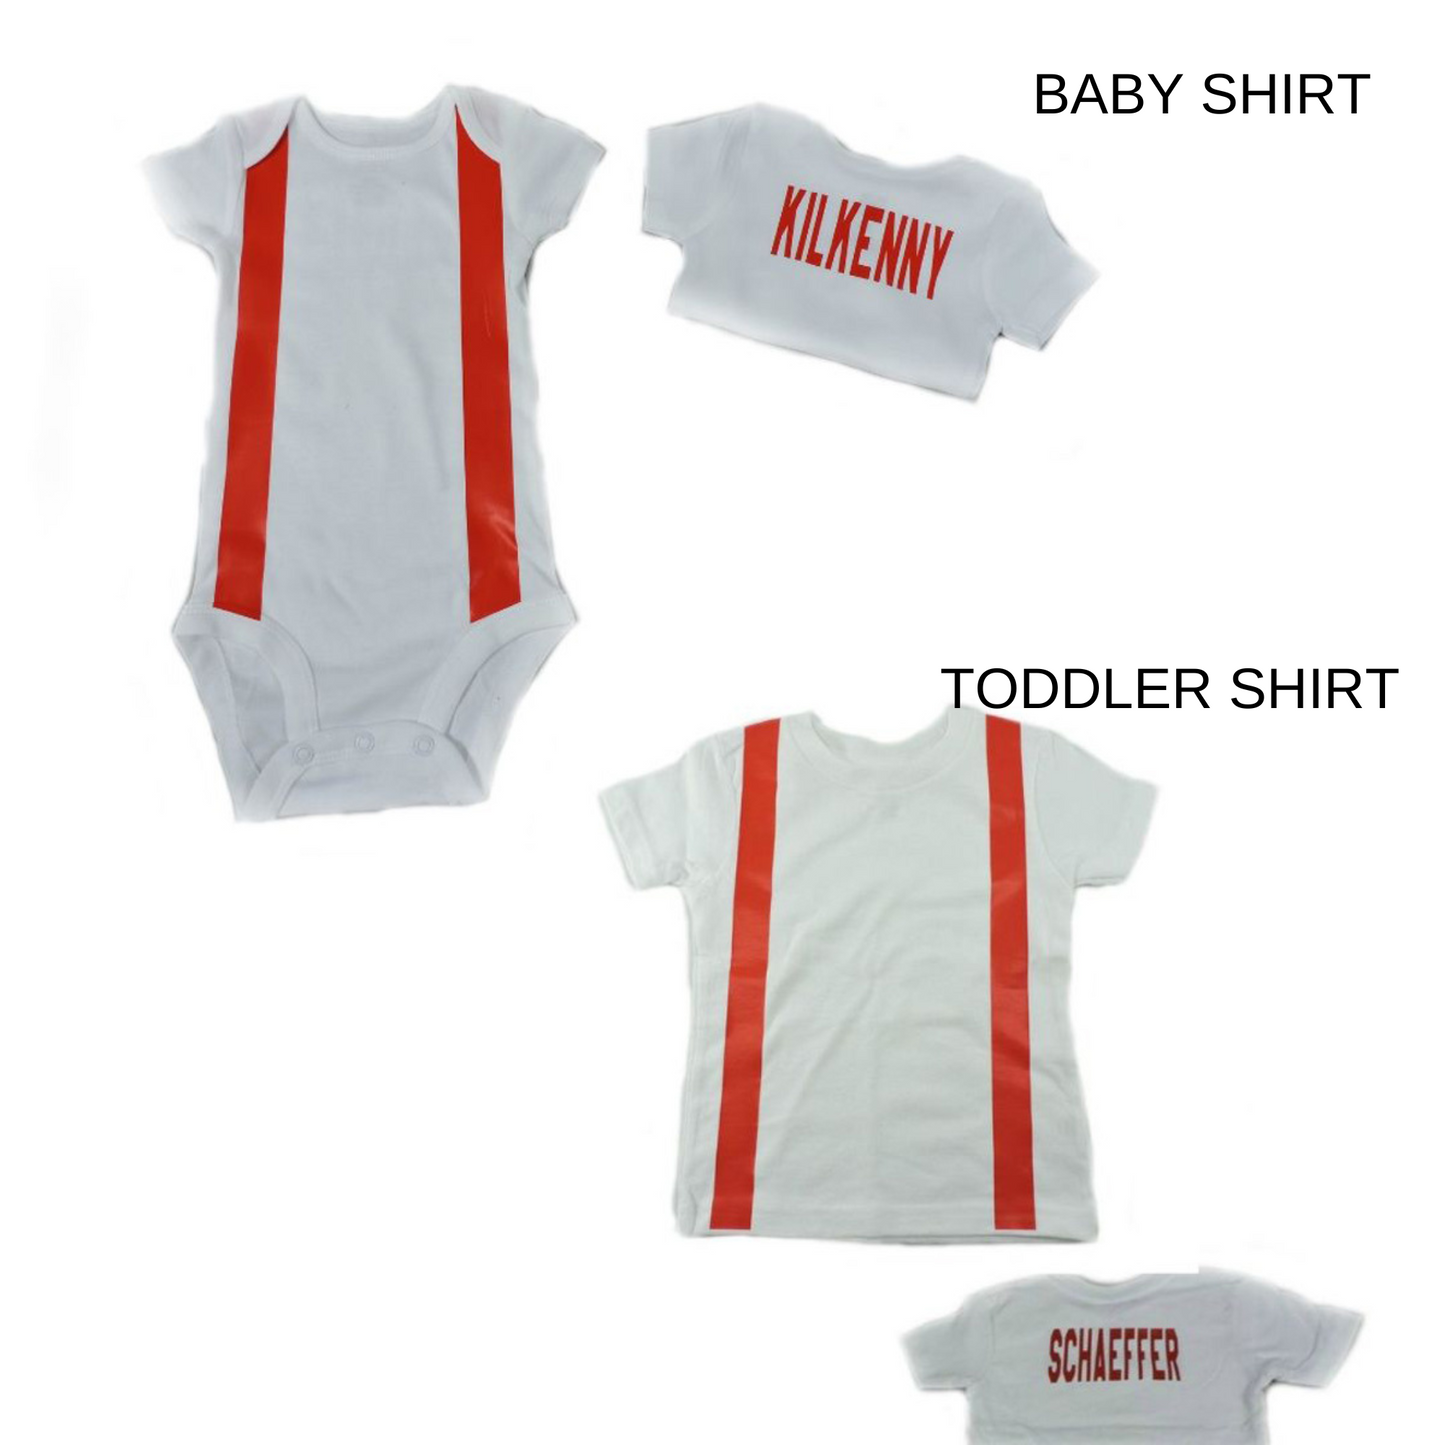 White with red suspenders Firefighter style baby And Toddler shirts